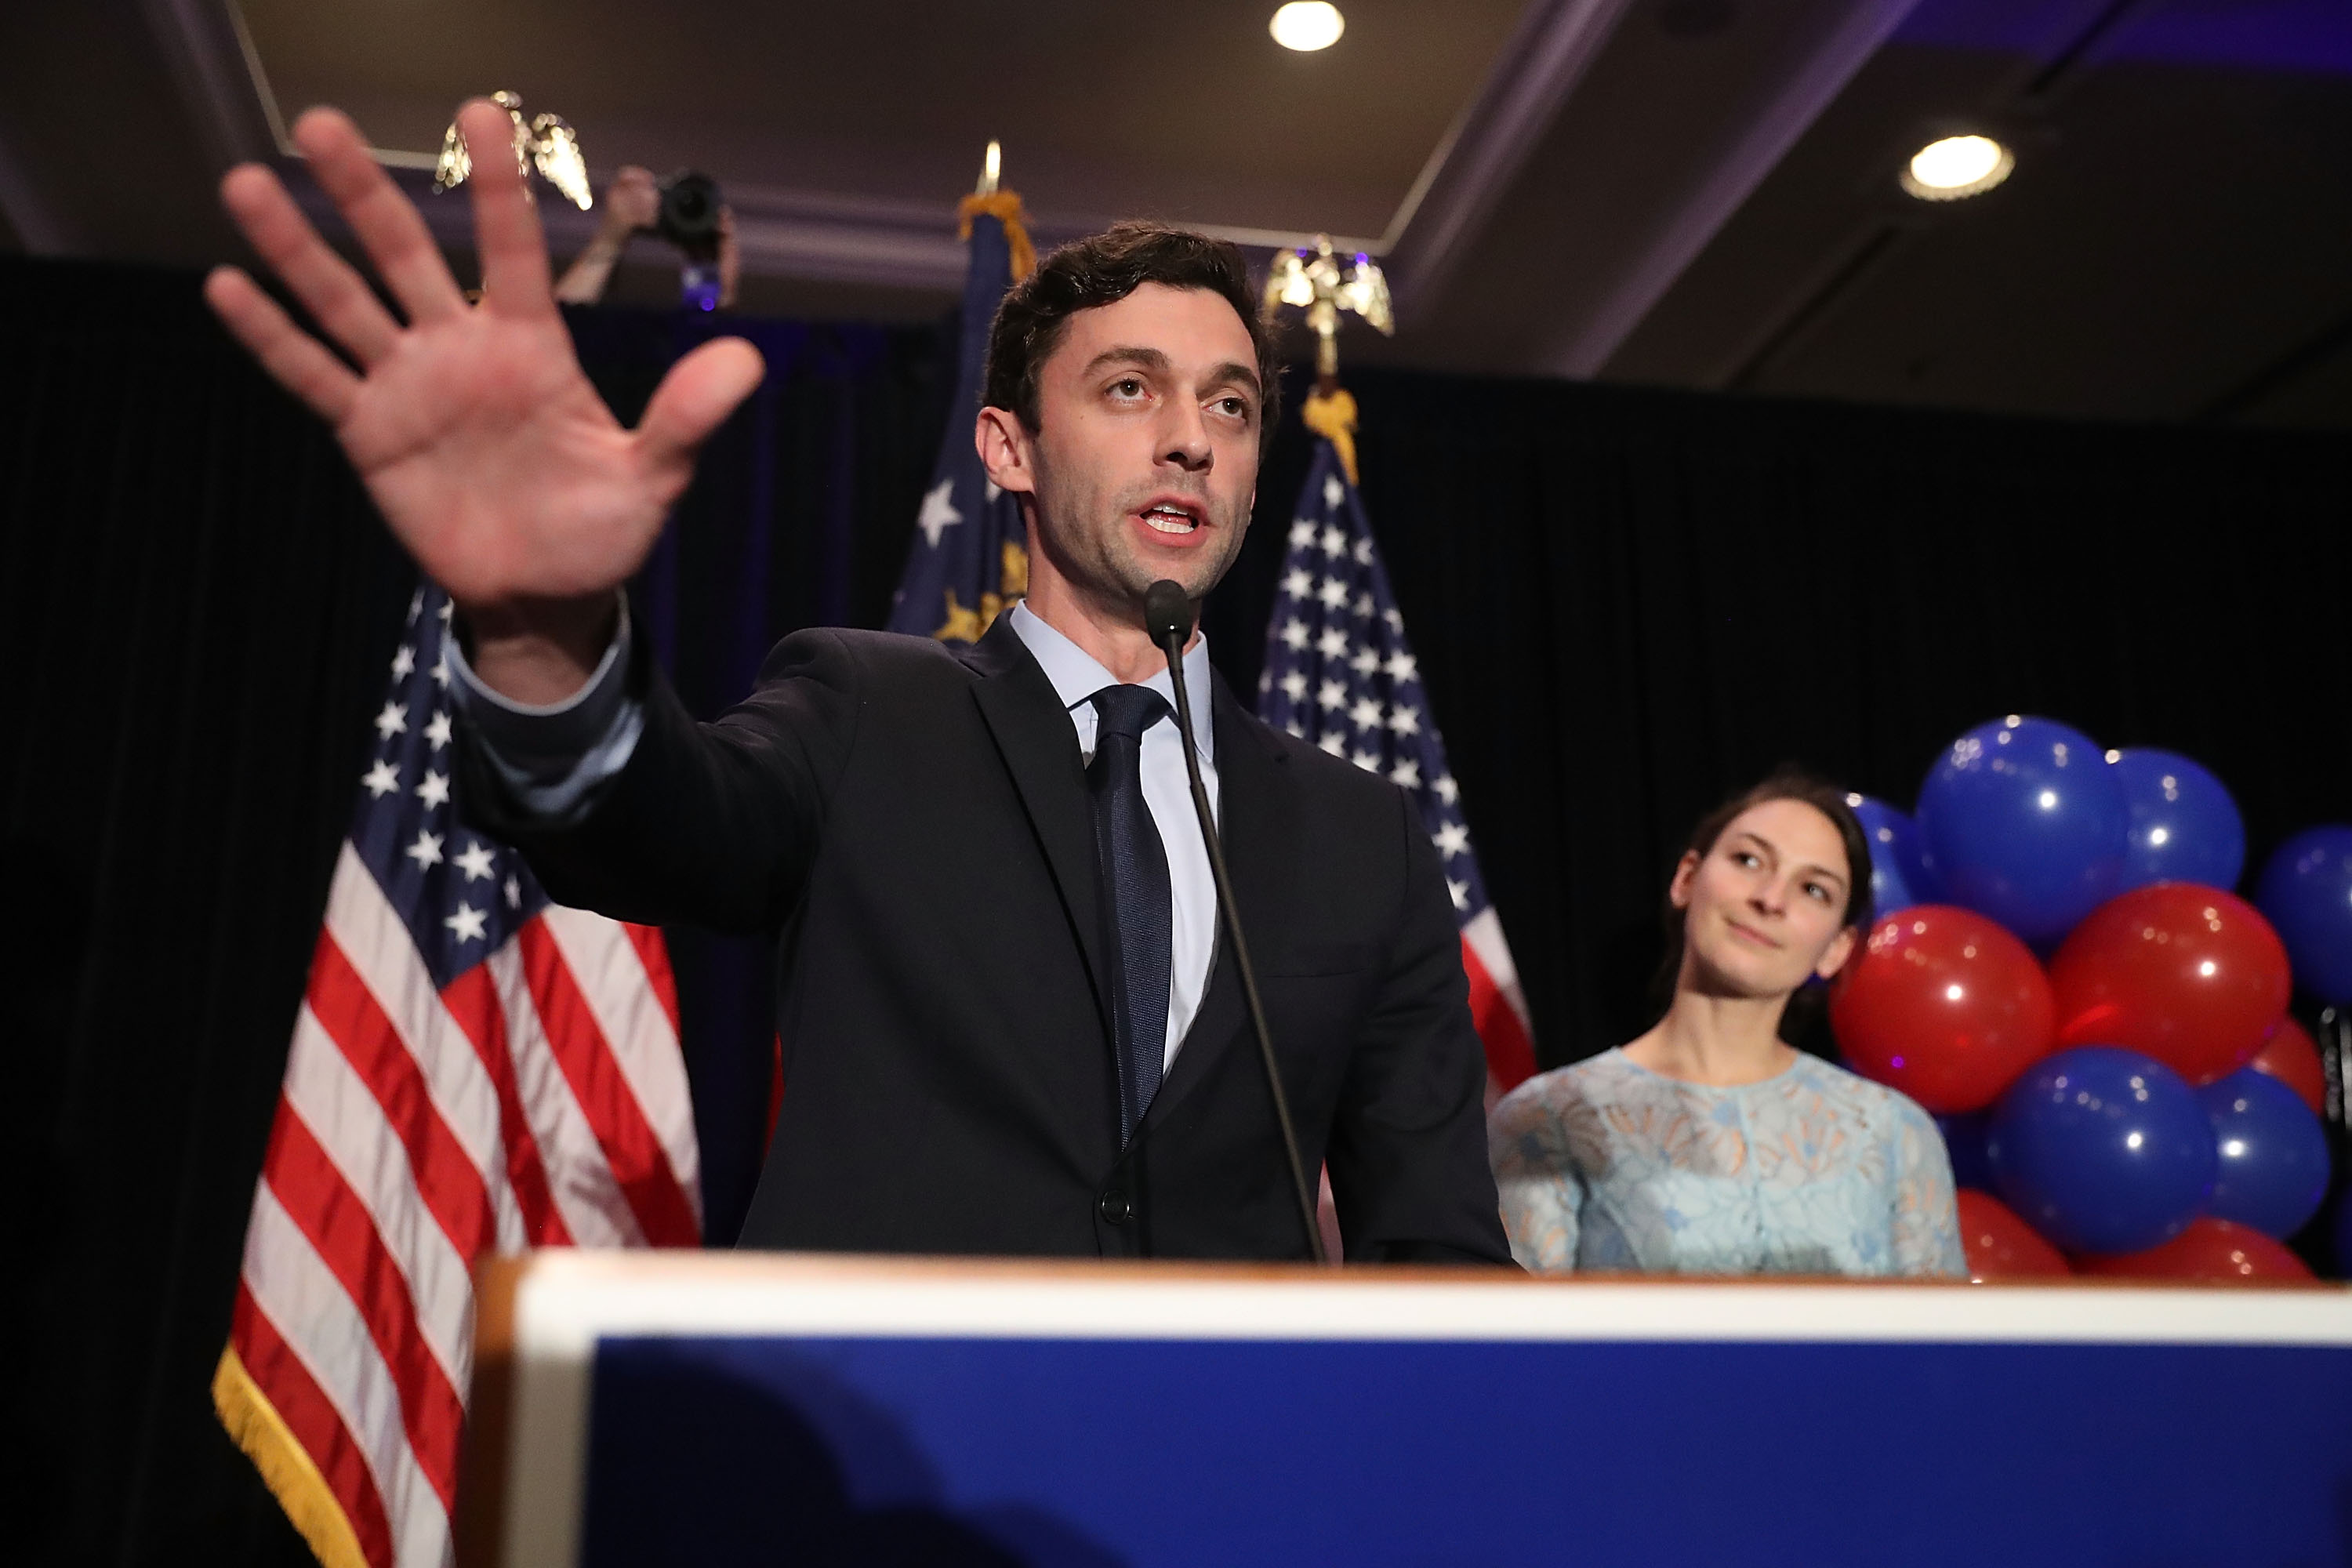 Democratic candidate Jon Ossoff delivers a concession speech as his fiancee, Alisha Kramer, listens during his election night party being held at the Westin Atlanta Perimeter North Hotel after returns show him losing the race for Georgia's 6th Congressional District on June 20, 2017 in Atlanta, Georgia. (Joe Raedle/Getty Images)